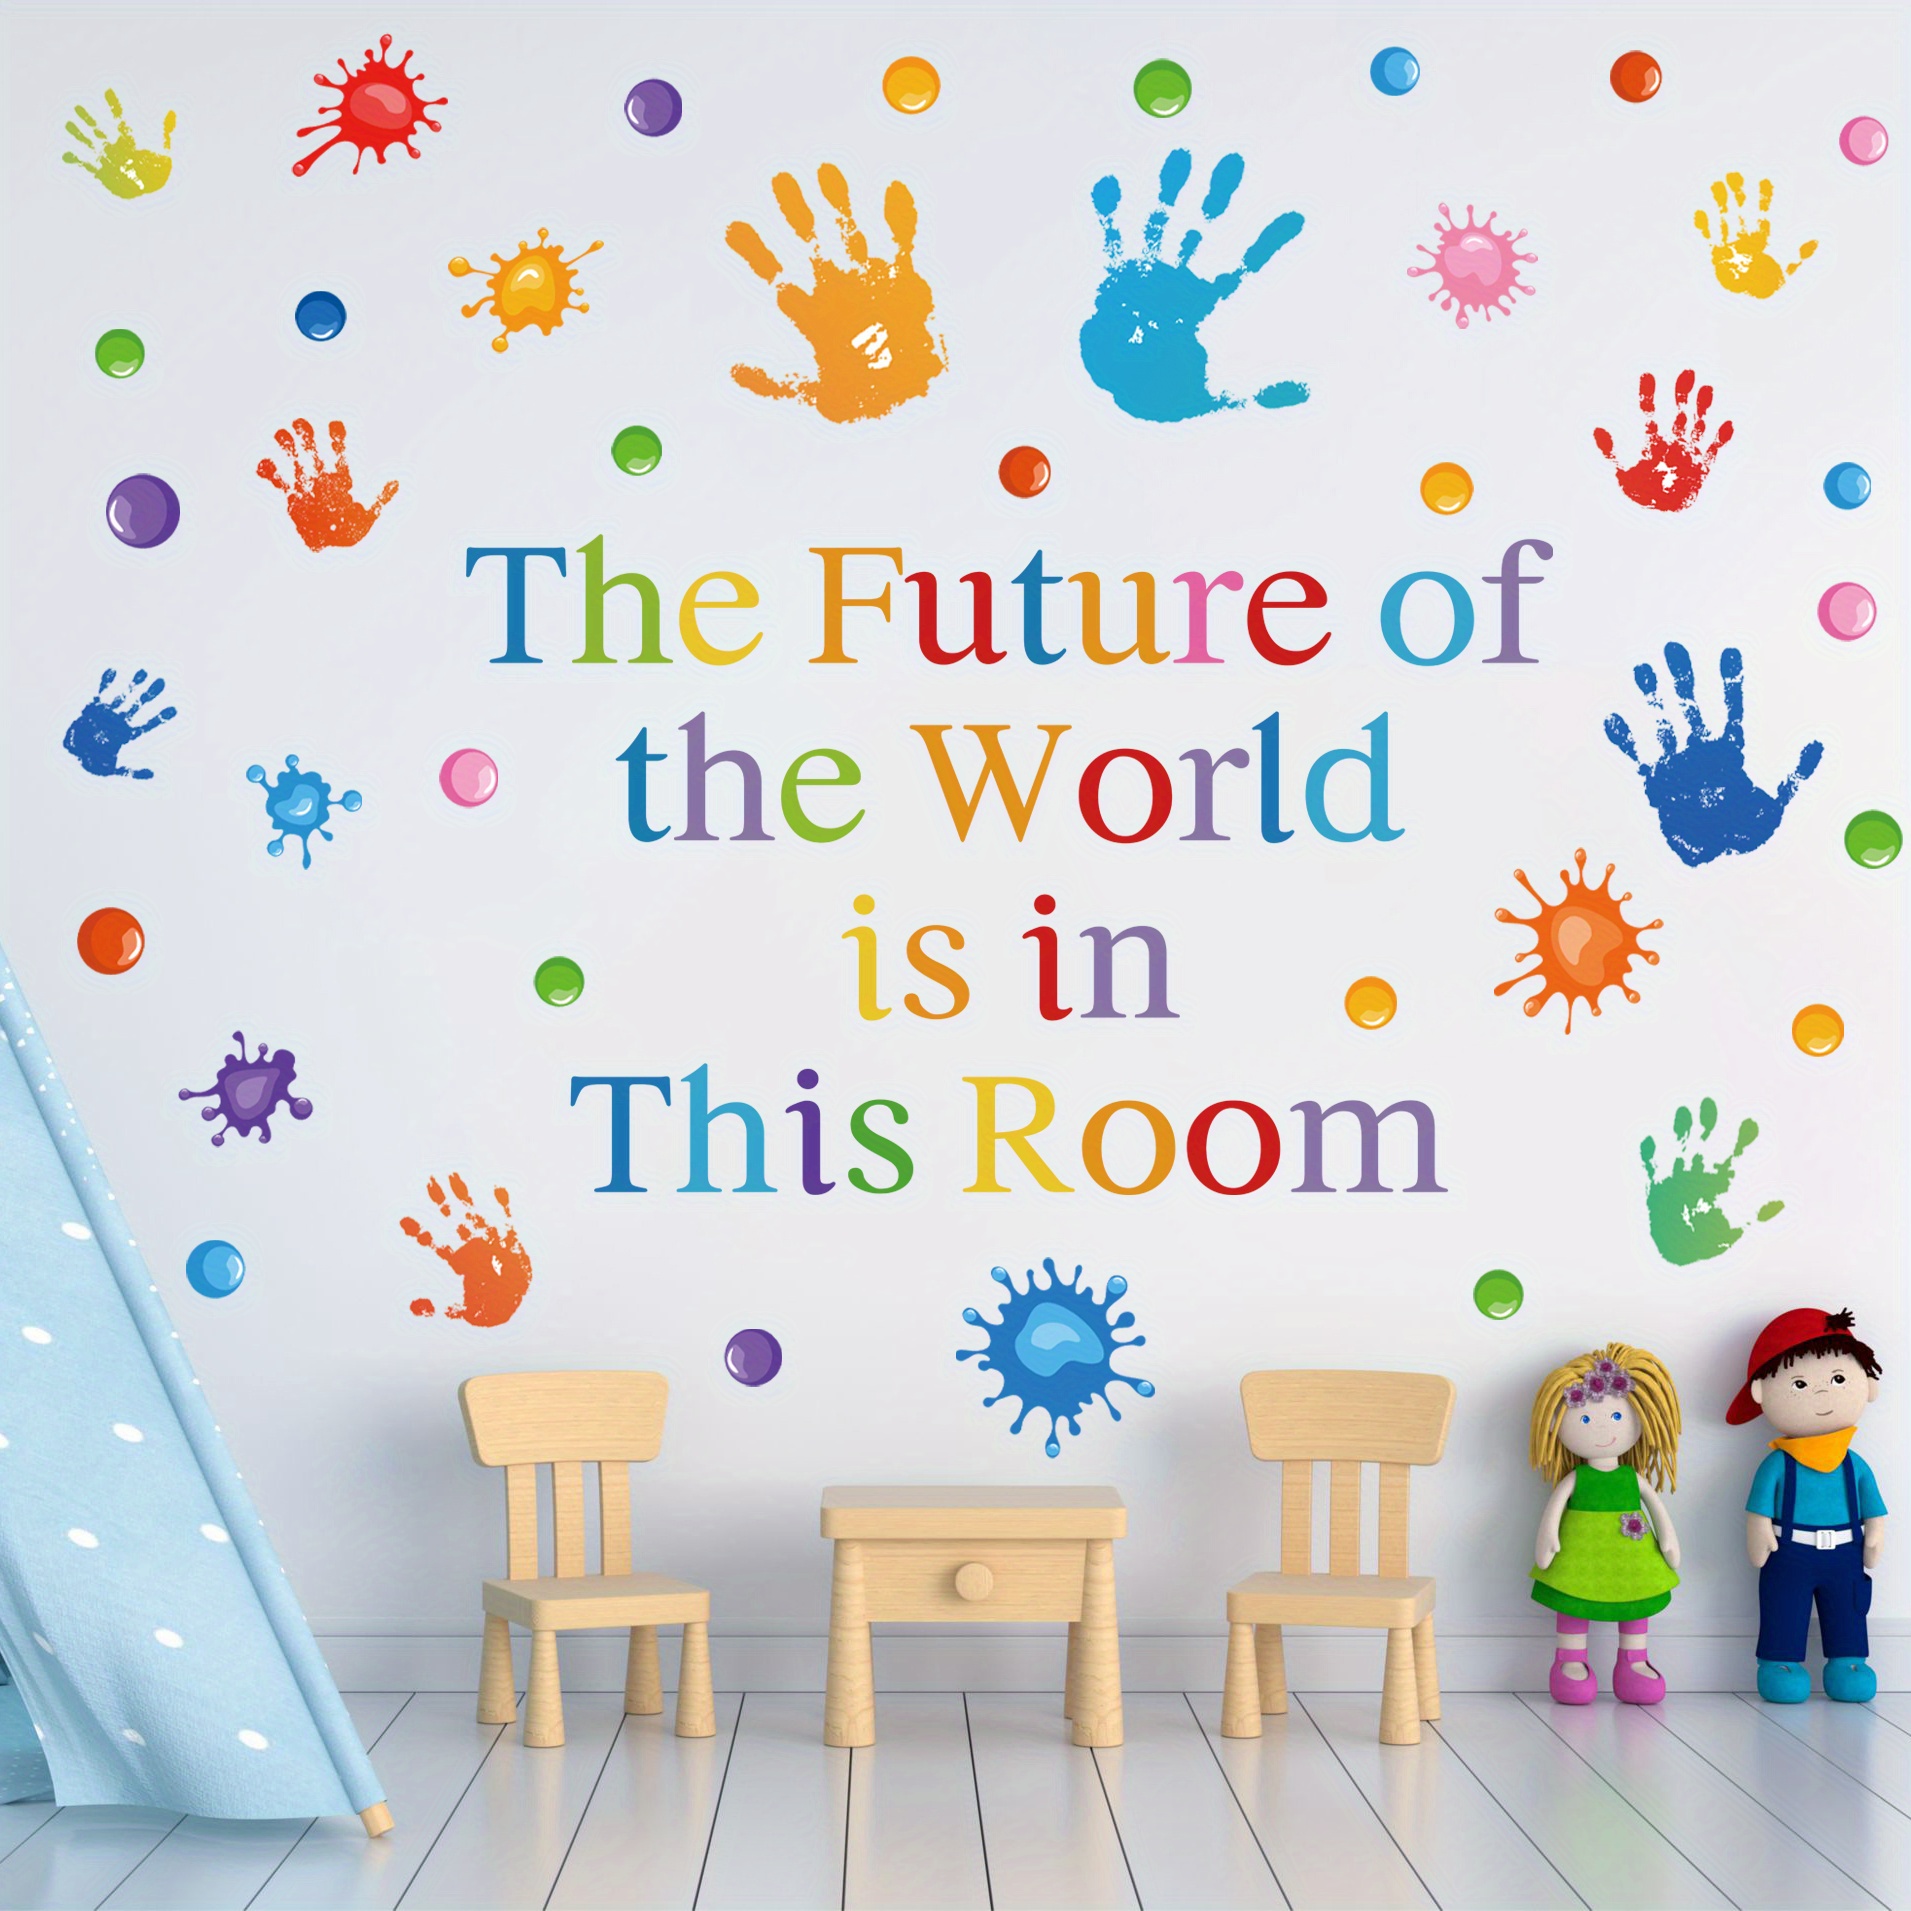 Wall Sticker Colorful Inspirational Quotes Wall Decal Vinyl Paint